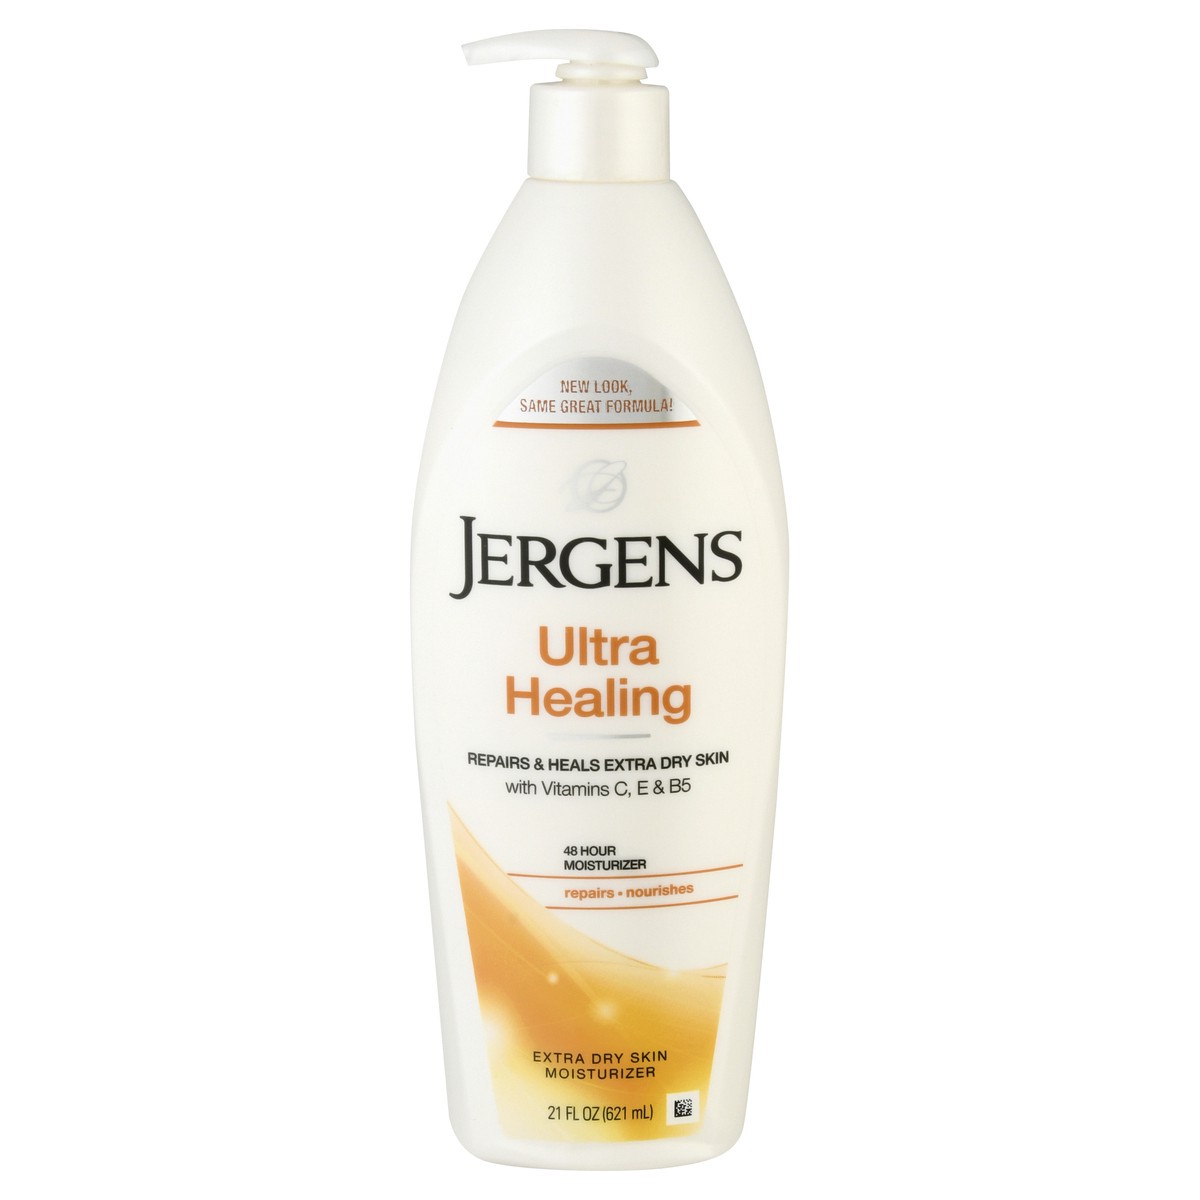 slide 1 of 67, Jergens Ultra Healing Dry Skin Moisturizer, Body and Hand Lotion, for Absorption into Extra Dry Skin, 21 Oz, 21 fl oz